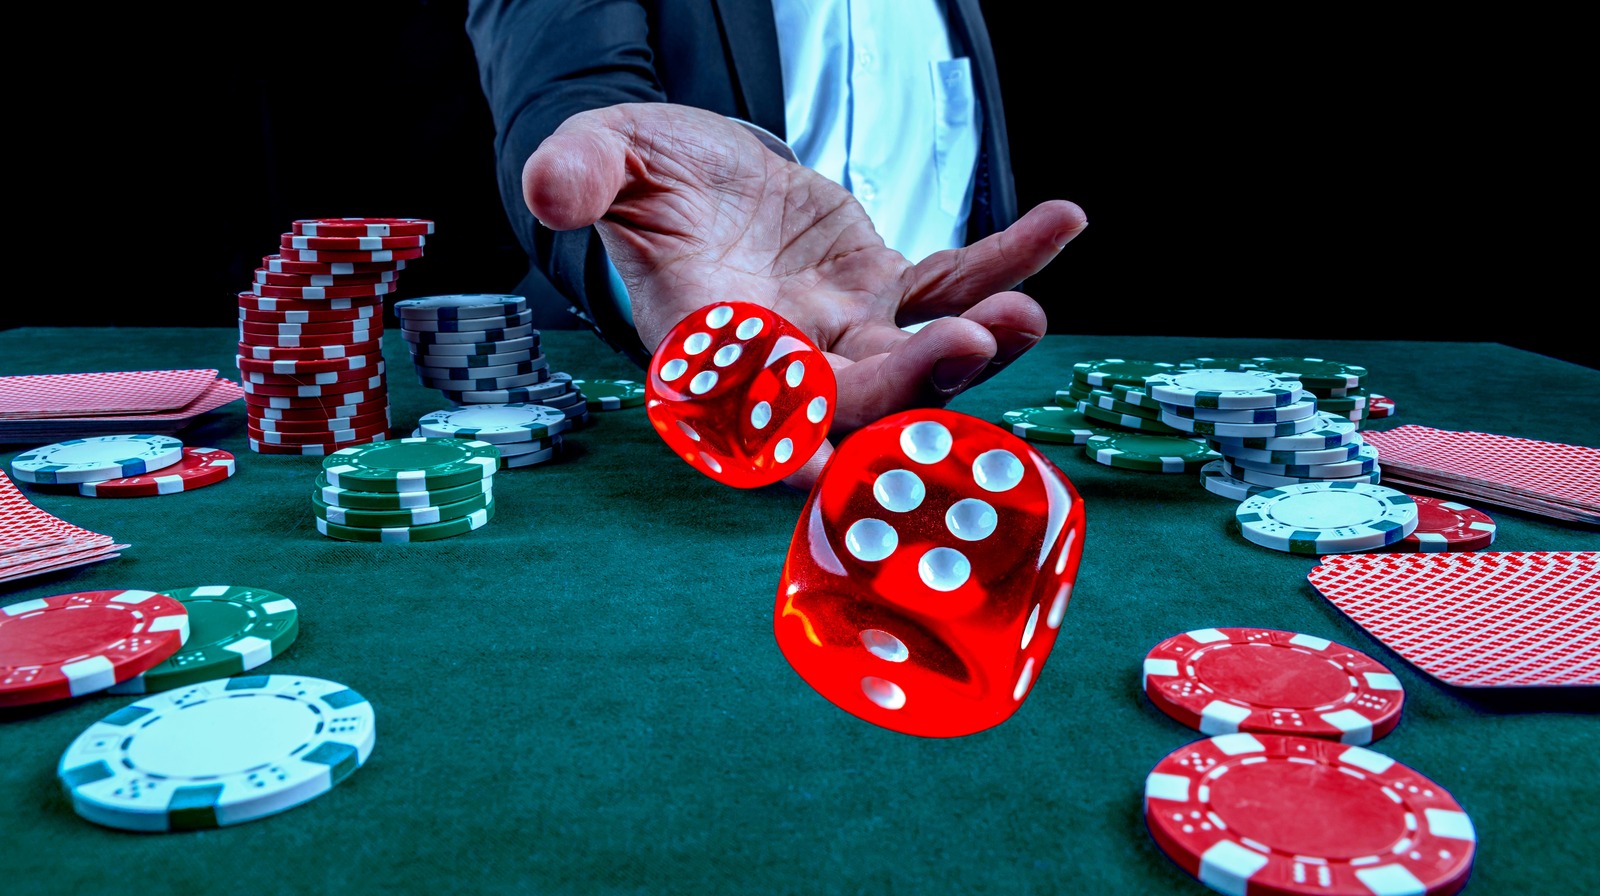 How To Know The Latest Casino Updates To Keep Players Informed